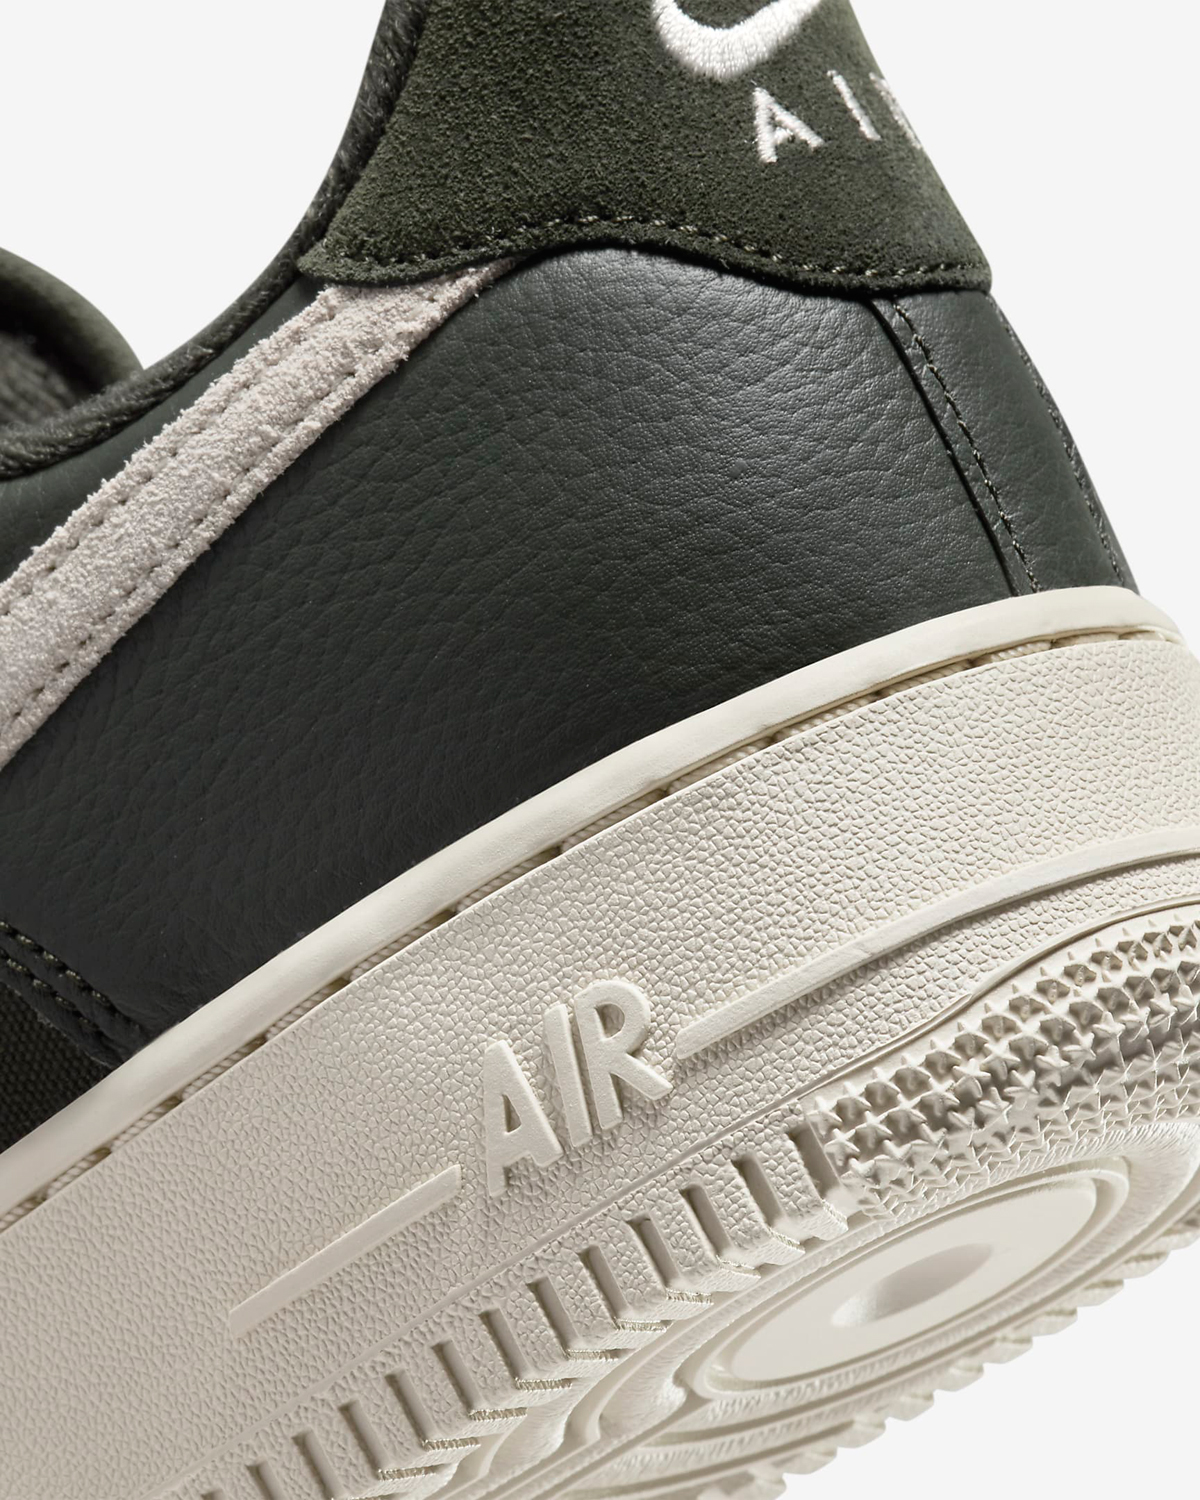 Nike-Air-Force-1-Low-NBHD-Sequoia-Release-Date-8